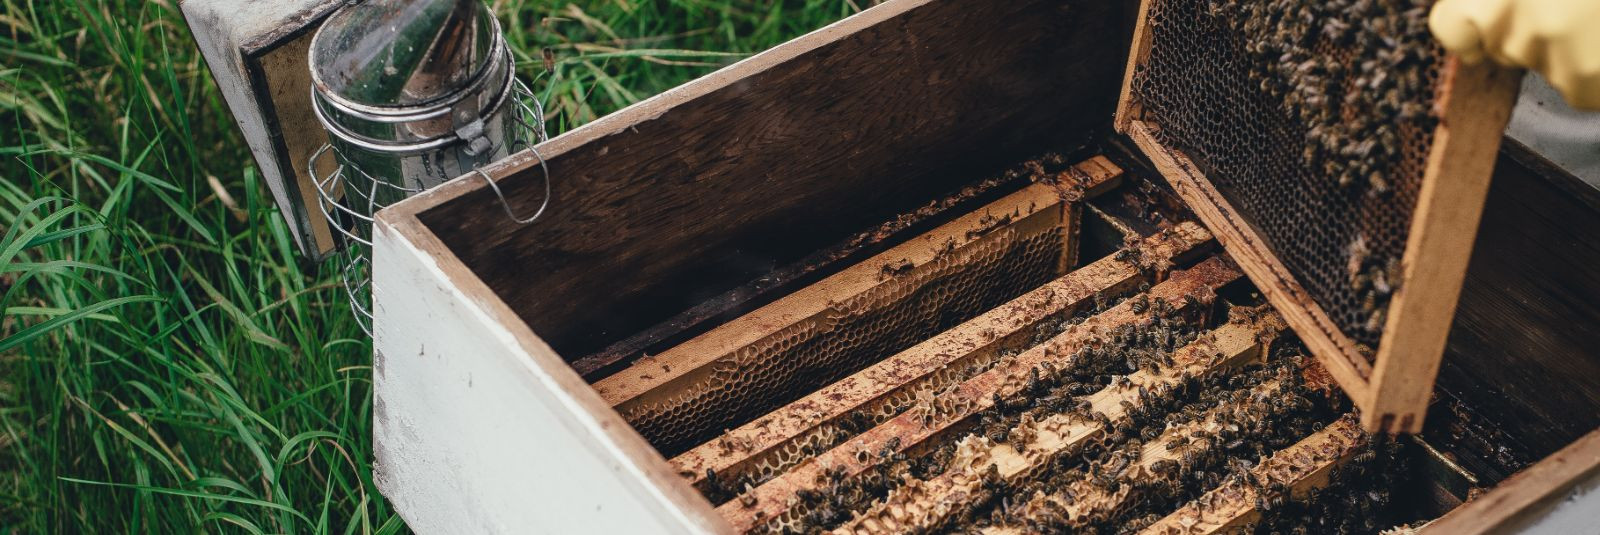 Beekeeping is much more than just filling honey jars. It\'s a deeply rooted tradition that harmoniously blends nature preservation and healthy lifestyle choices